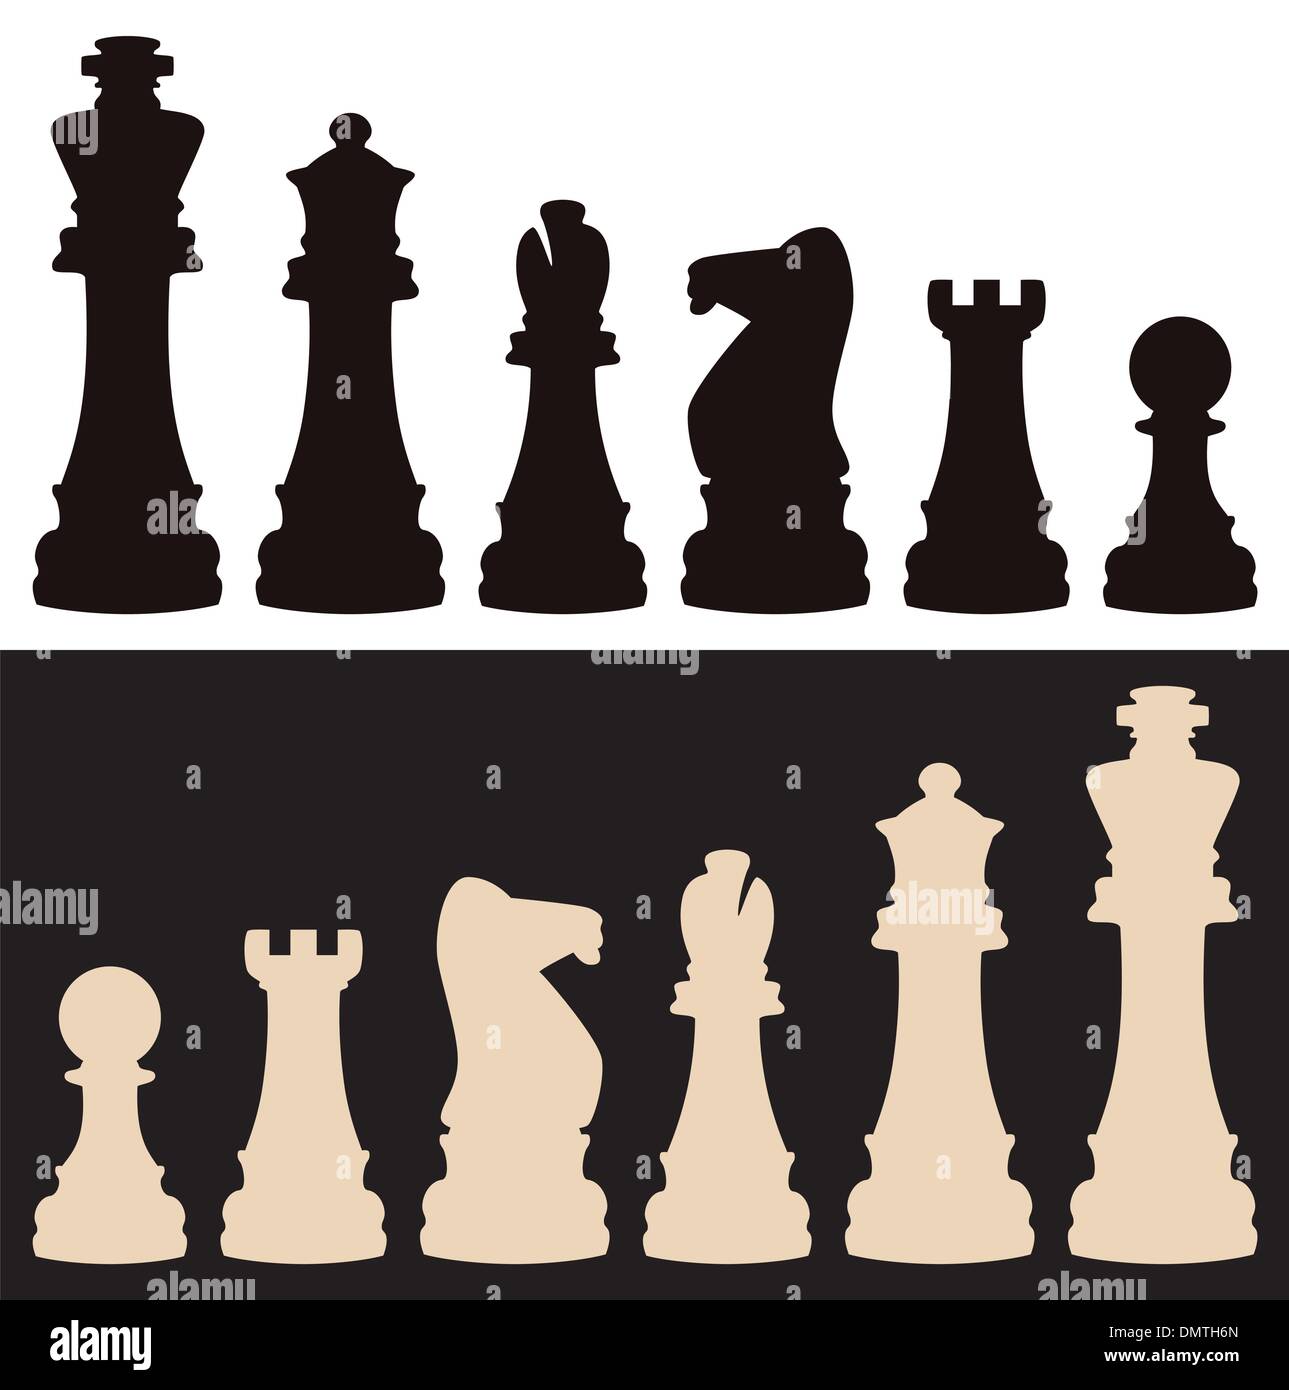 Chess Piece Names Stock Illustrations – 18 Chess Piece Names Stock  Illustrations, Vectors & Clipart - Dreamstime